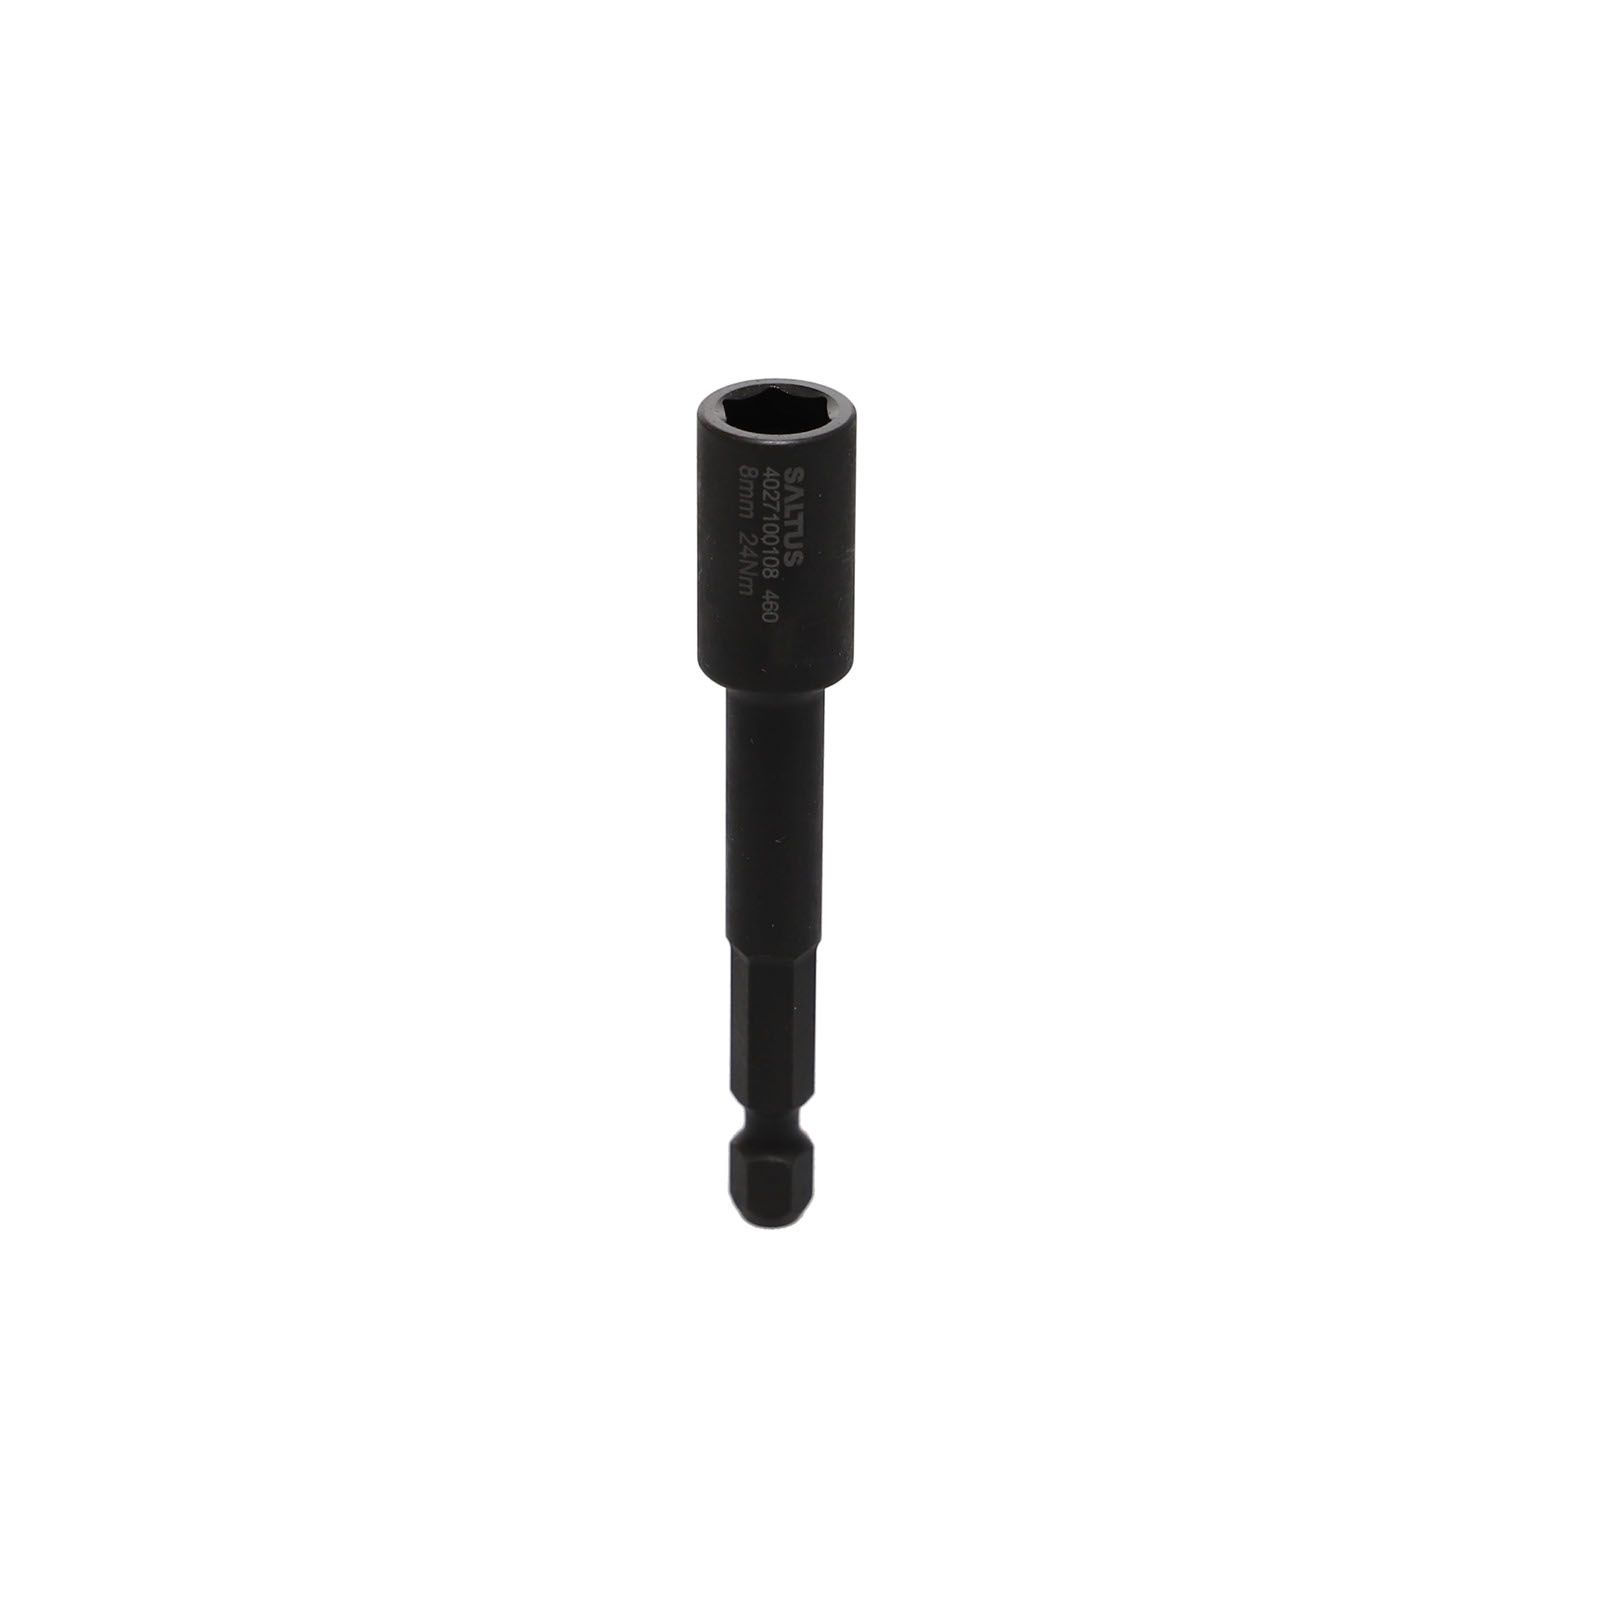 Nut setter-HEXE1/4-L75-HEX8 product photo